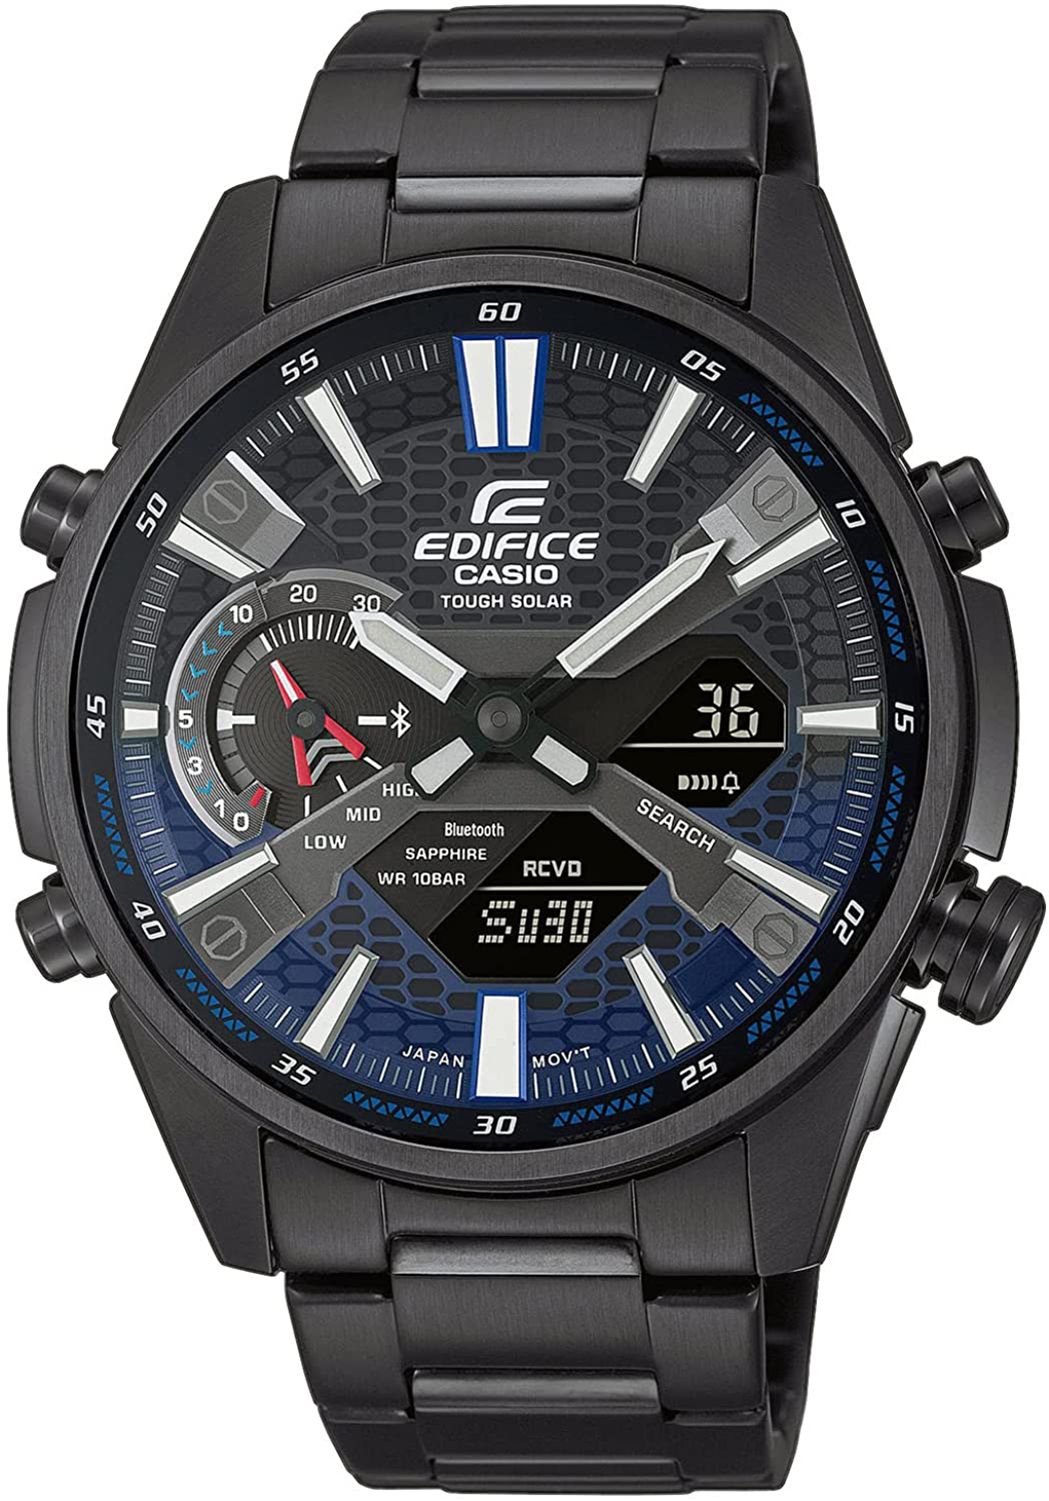 This Casio Edifice Analogue-Digital Watch for Men is the perfect timepiece to wear or to gift. It's Black 42 mm Round case combined with the comfortable Black Stainless steel watch band will ensure you enjoy this stunning timepiece without any compromise. Operated by a high quality Quartz movement and water resistant to 10 bars, your watch will keep ticking. This sporty and clasical watch is perfect for every occasion! -The watch has a calendar function: Day-Date, Bluetooth, Solar Powered, Stop Watch, Worldtime, Countdown High quality 21 cm length and 21 mm width Black Stainless steel strap with a Fold over with push button clasp Case diameter: 42 mm,case thickness: 10 mm, case colour: Black and dial colour: Black